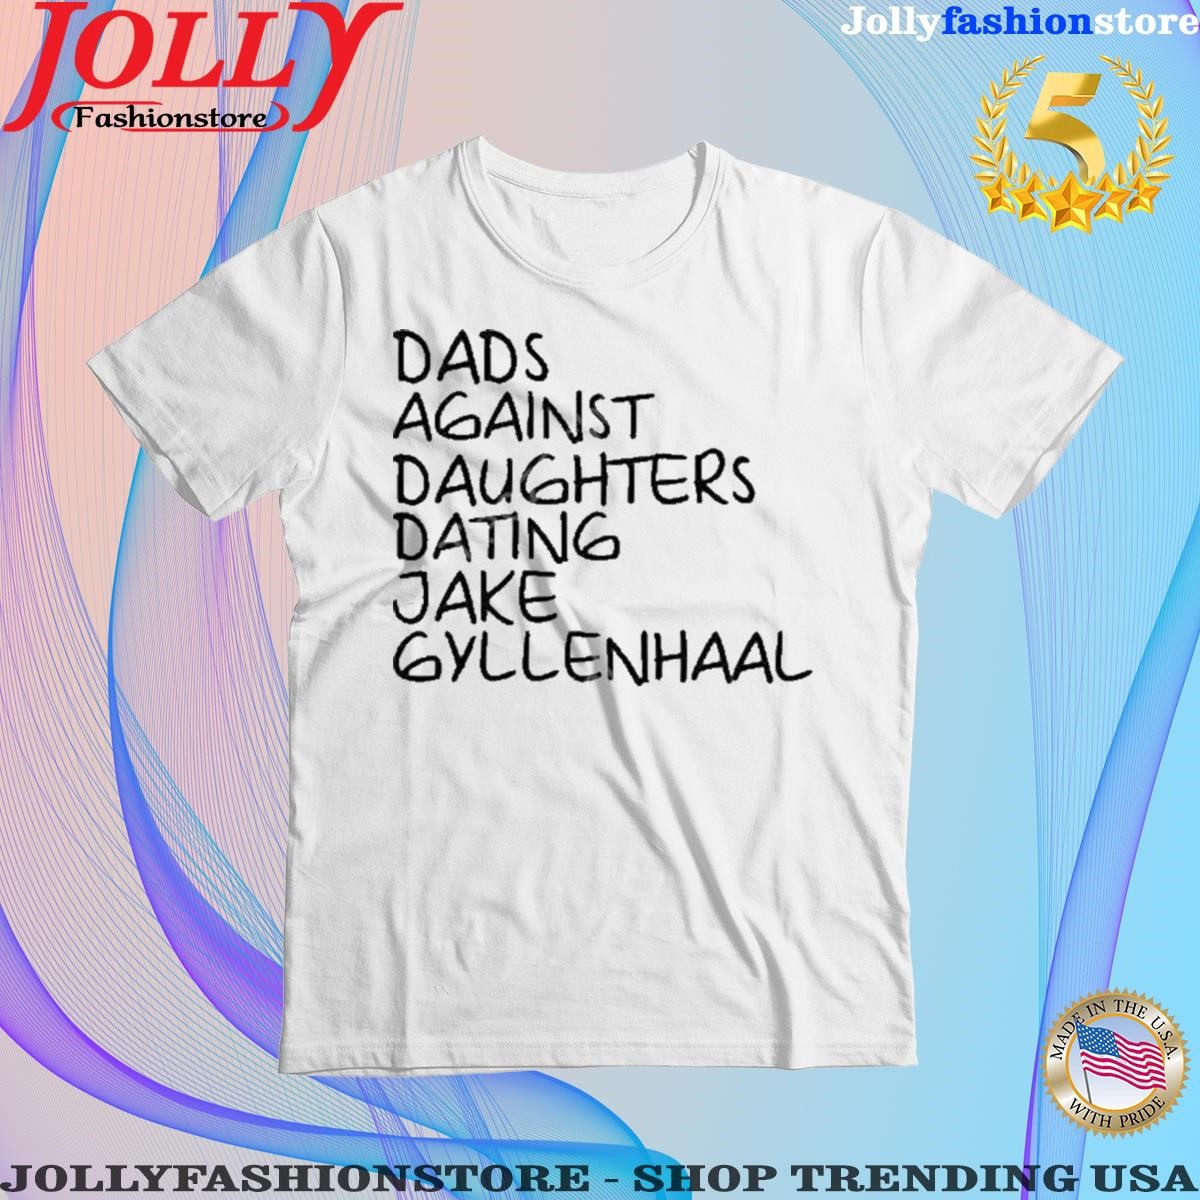 Dave Portnoy Dads Against Daughters Dating Jake Gyllenhaal Shirt